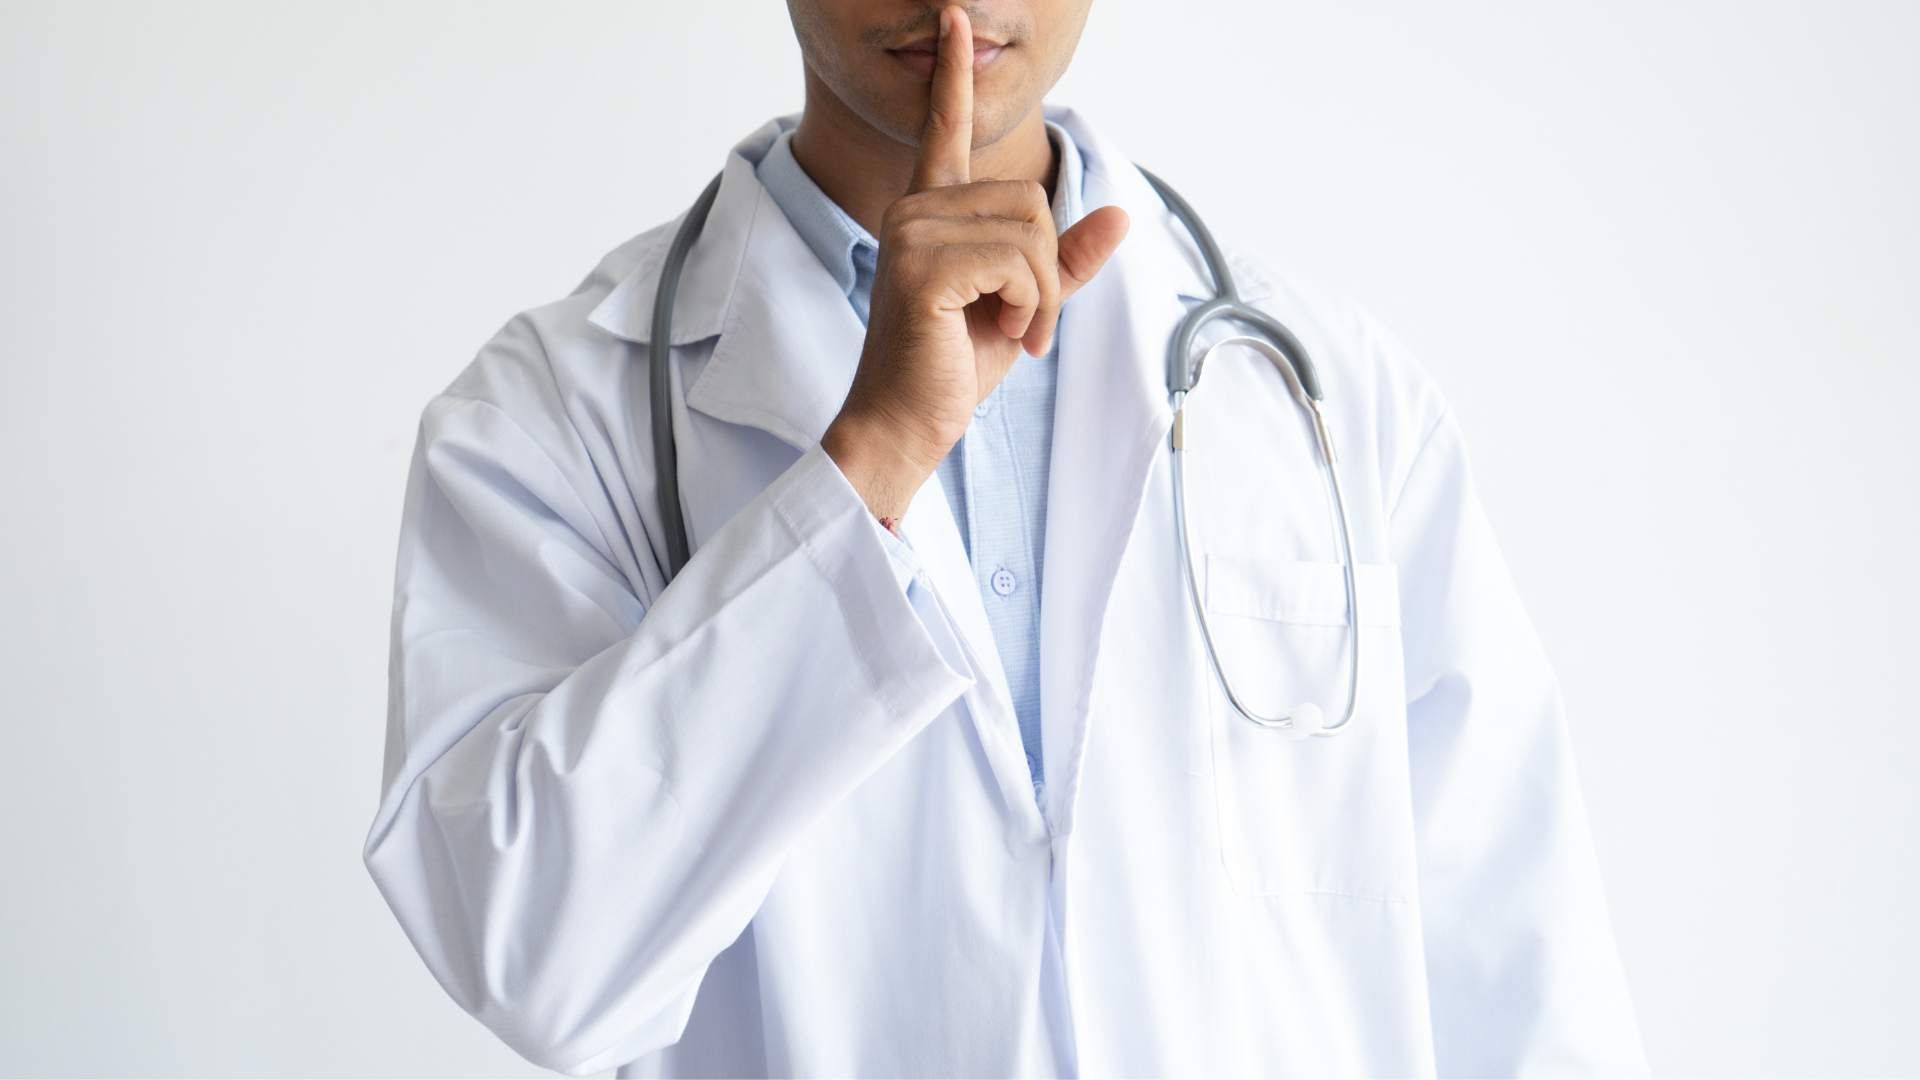 Bust of a Black or Brown person of color, in a healthcare attire with a stetoscope around their neck. Only half of their face is visible, and they have put a finger up to their mouth displaying "silence" or "secret".